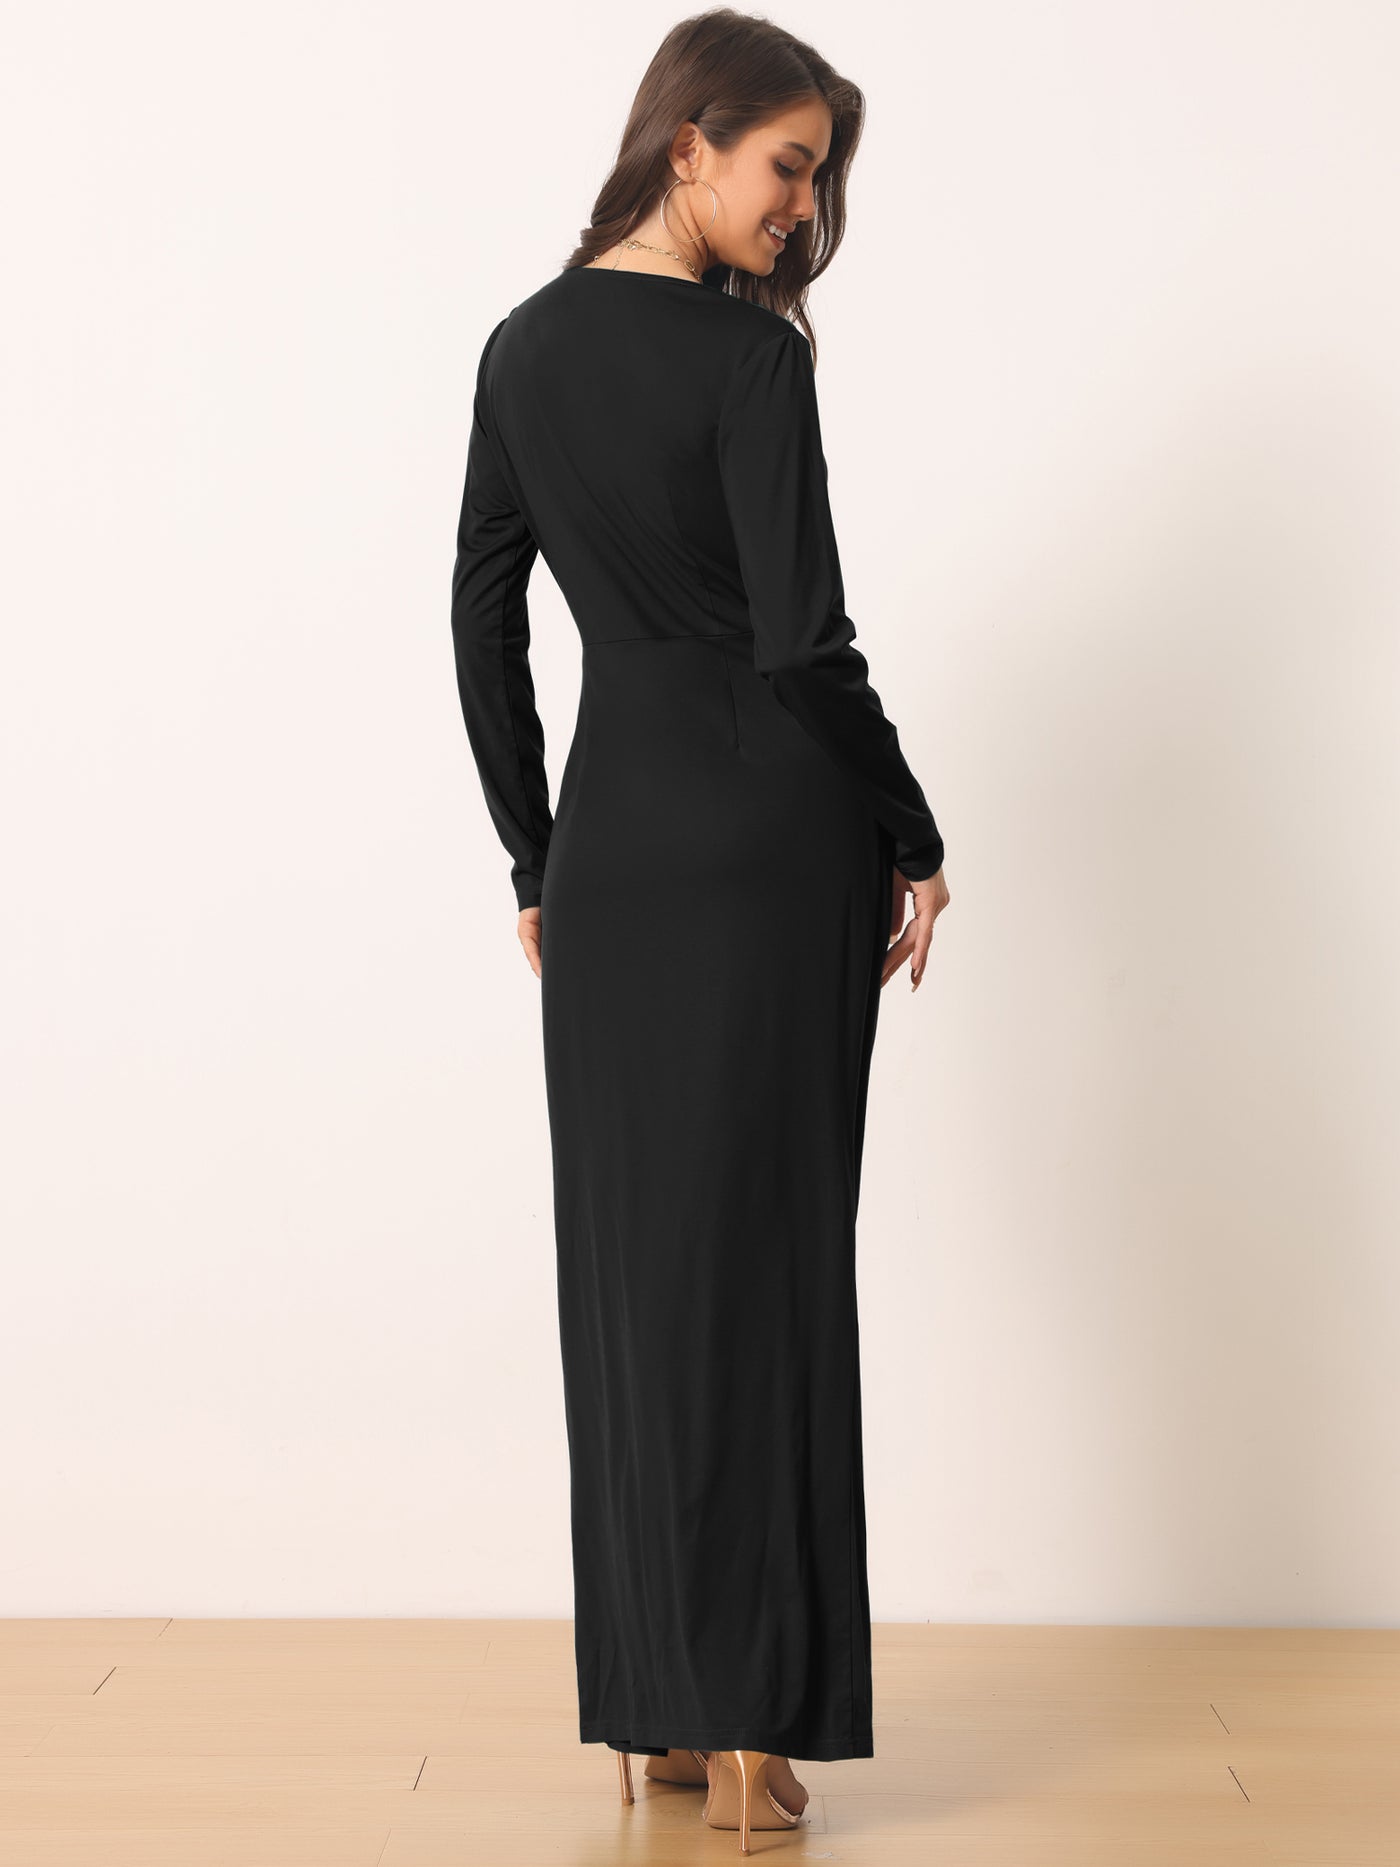 Bublédon Long Sleeve V Neck Draped Front Ruched Cocktail Splited Party Maxi Bodycon Dress